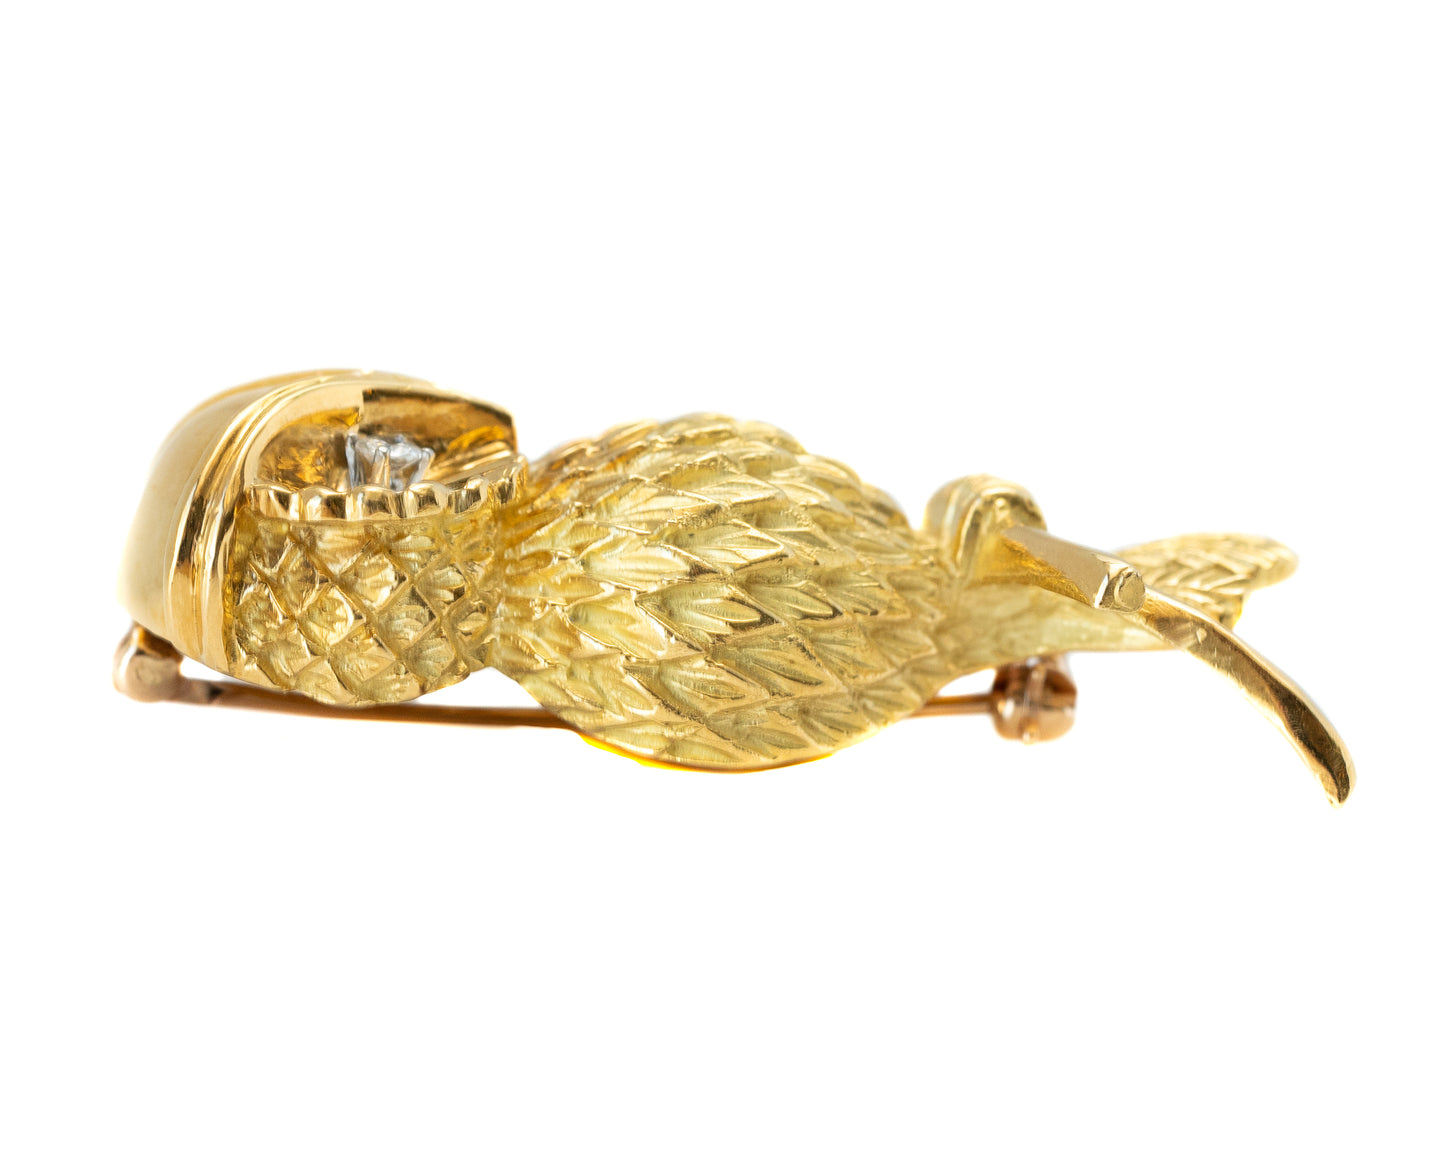 Tiffany and Co. 18k Gold Owl Brooch